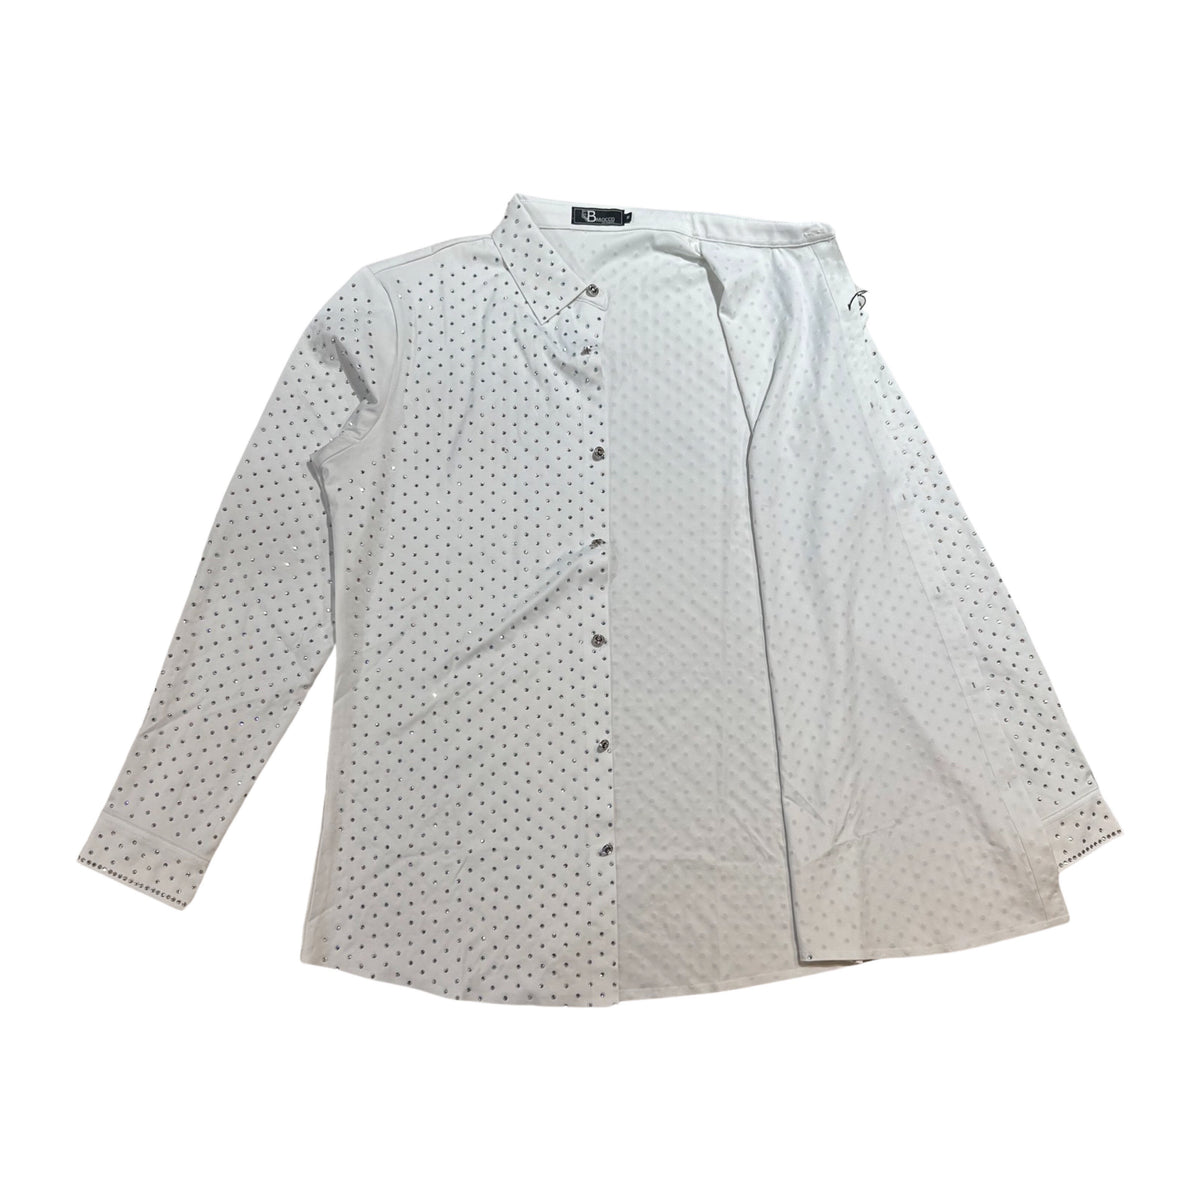 Barocco White Fully Loaded Iridescent Crystal Button Up Shirt - Dudes Boutique